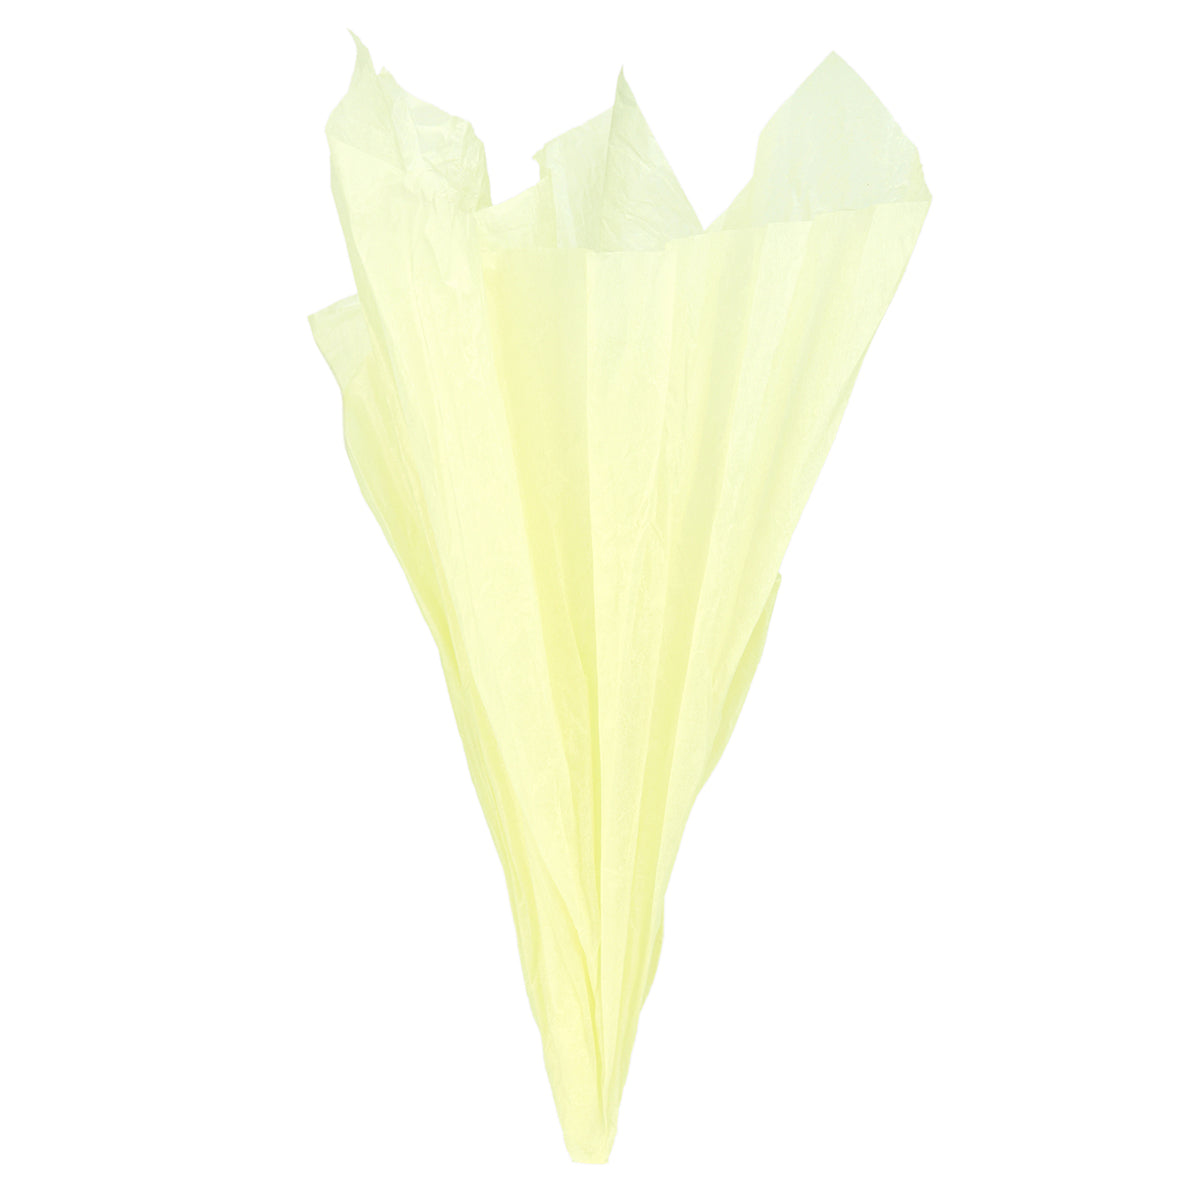 Displaying of a light yellow tissue paper in ice cream cone shape